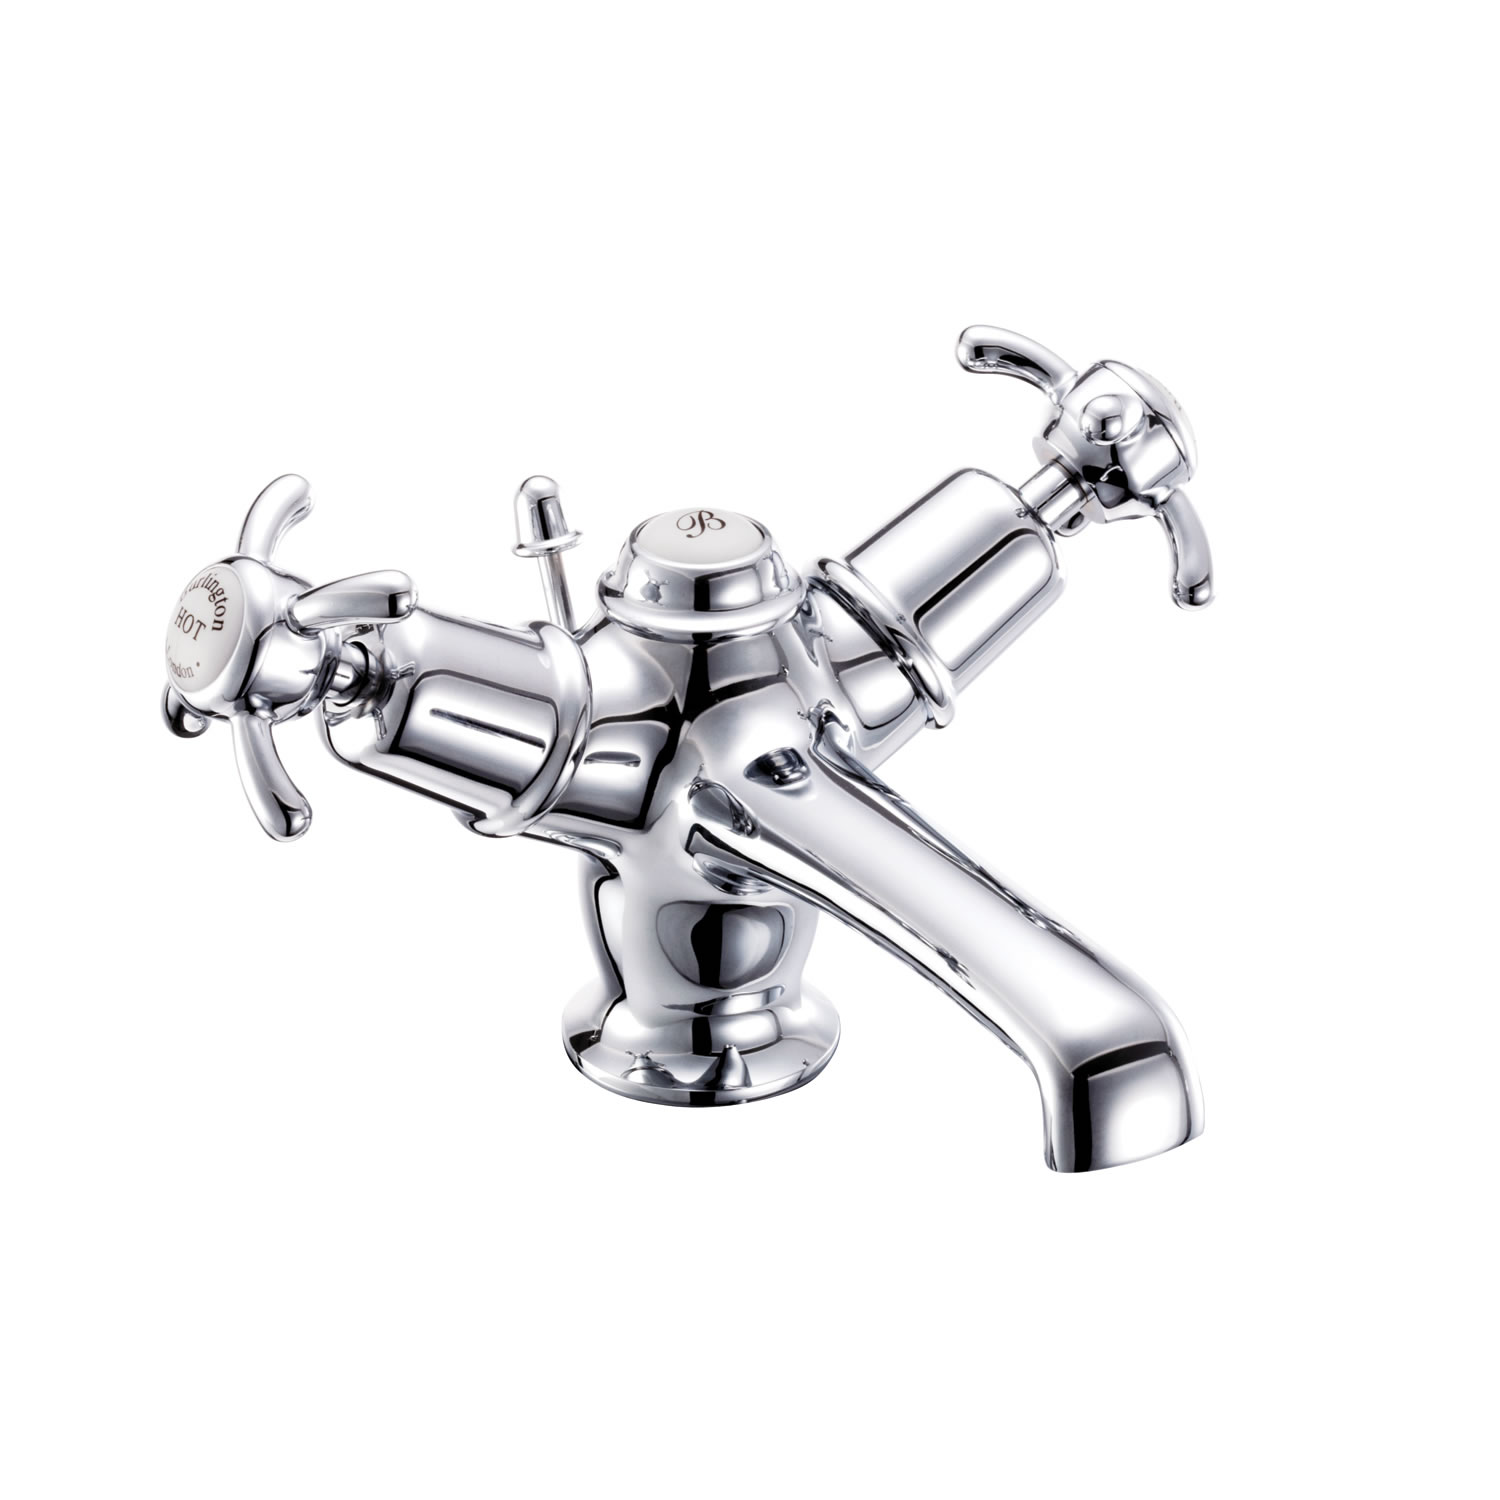 Anglesey basin mixer with low central indice with pop-up waste